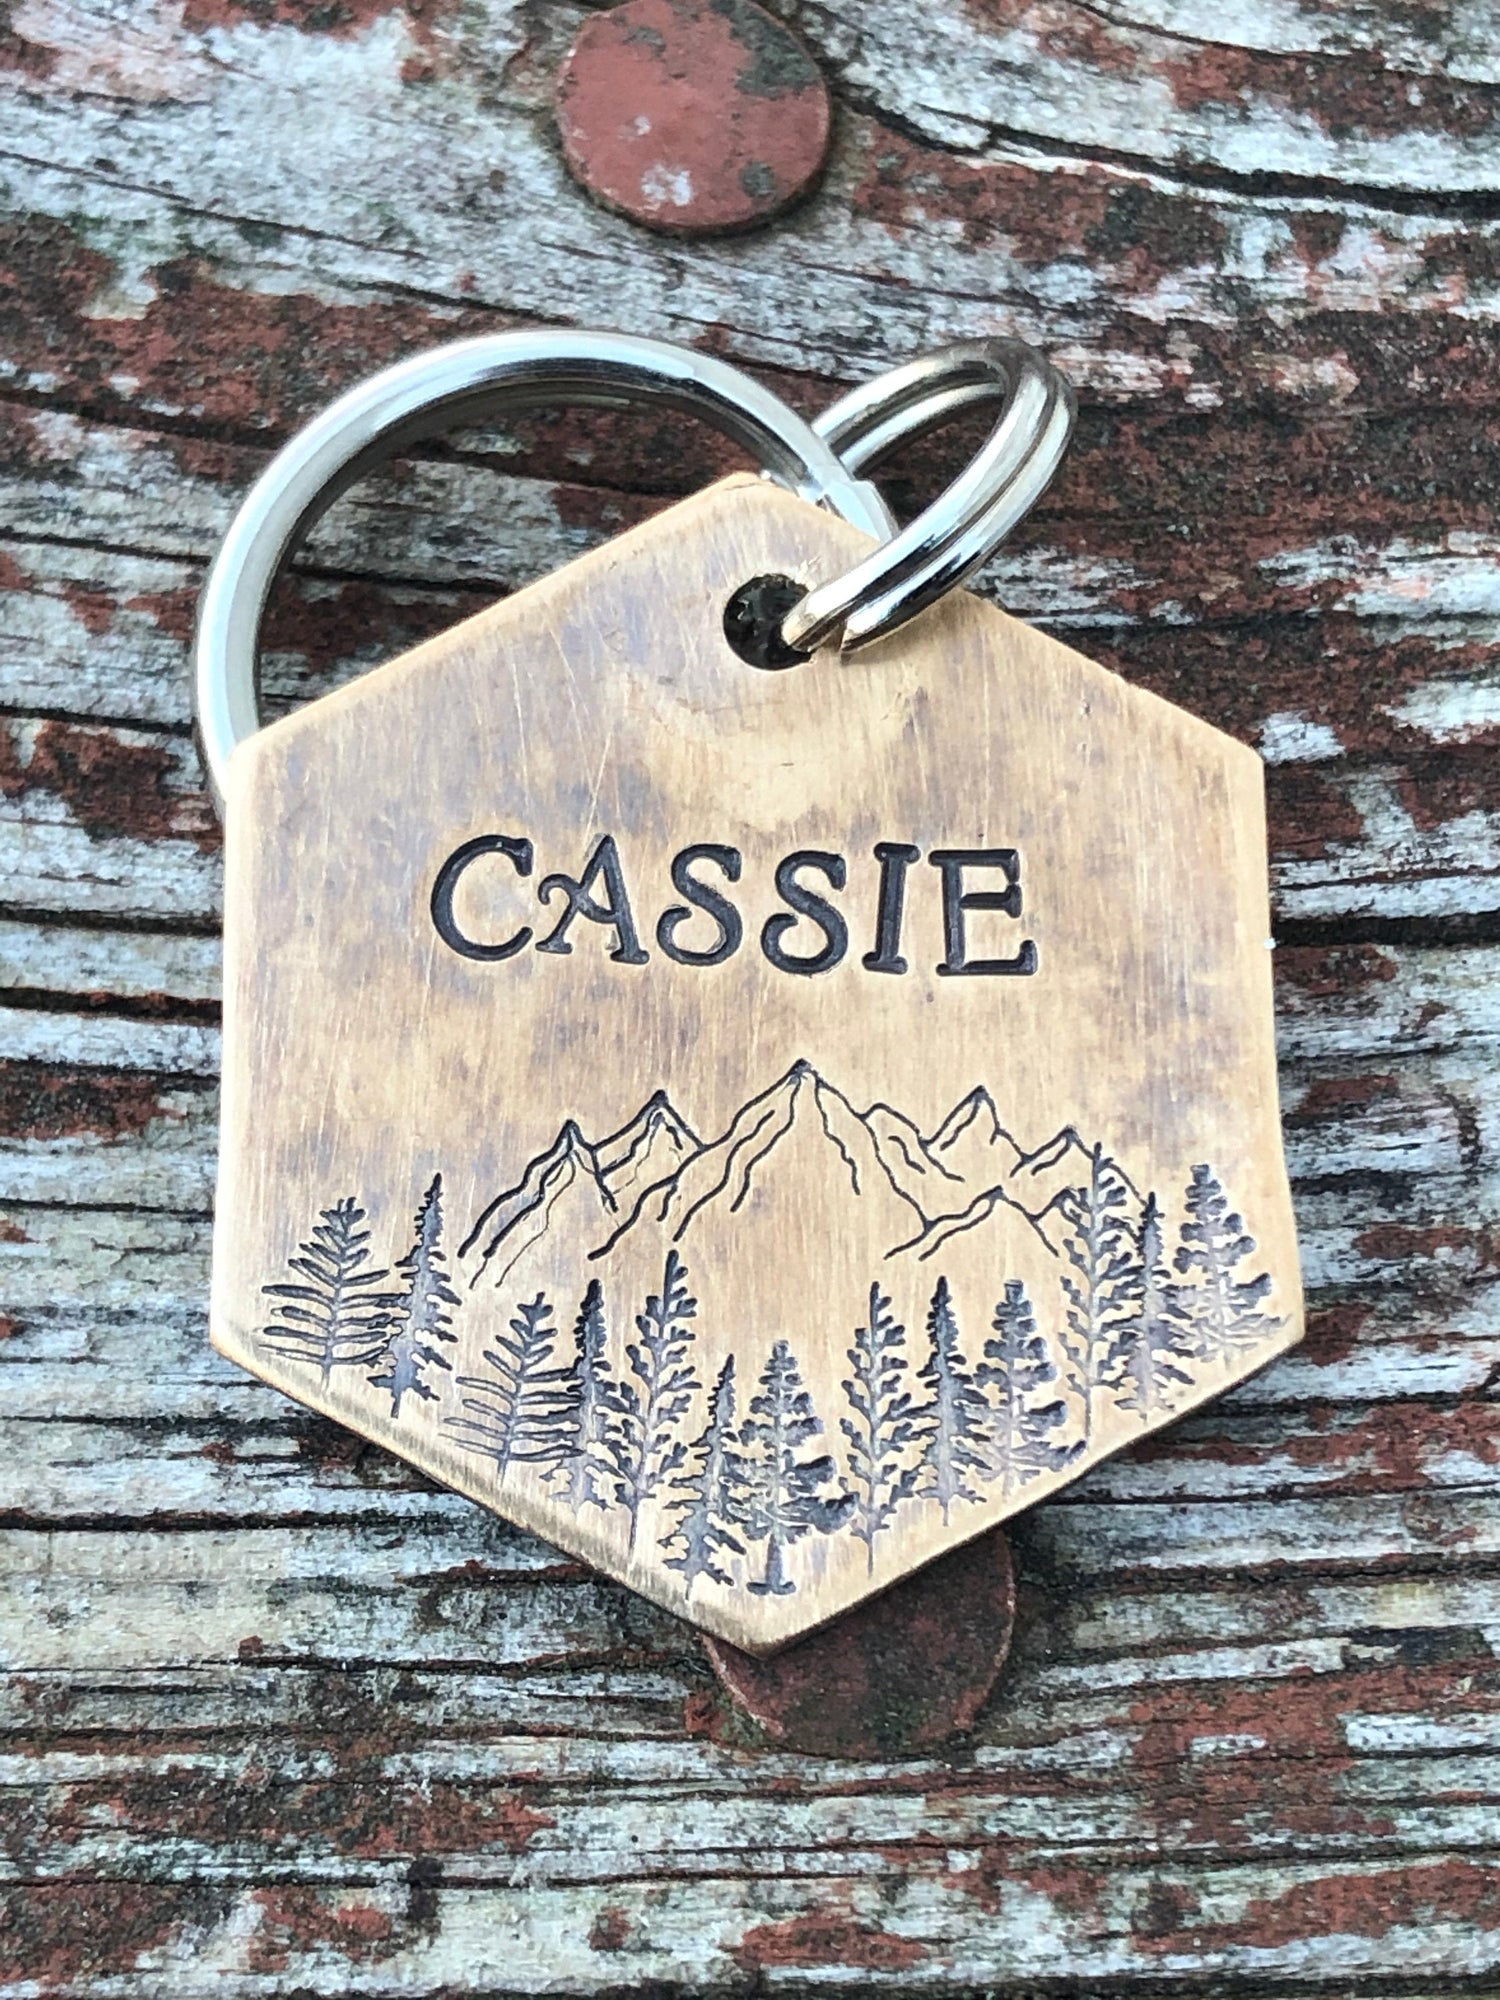 Dog Tag, Dog Tag for Dogs, Dog Tags, Pet ID Tag, Cassie, Personalized Dog Tag, Custom Dog Tag, Hand Stamped